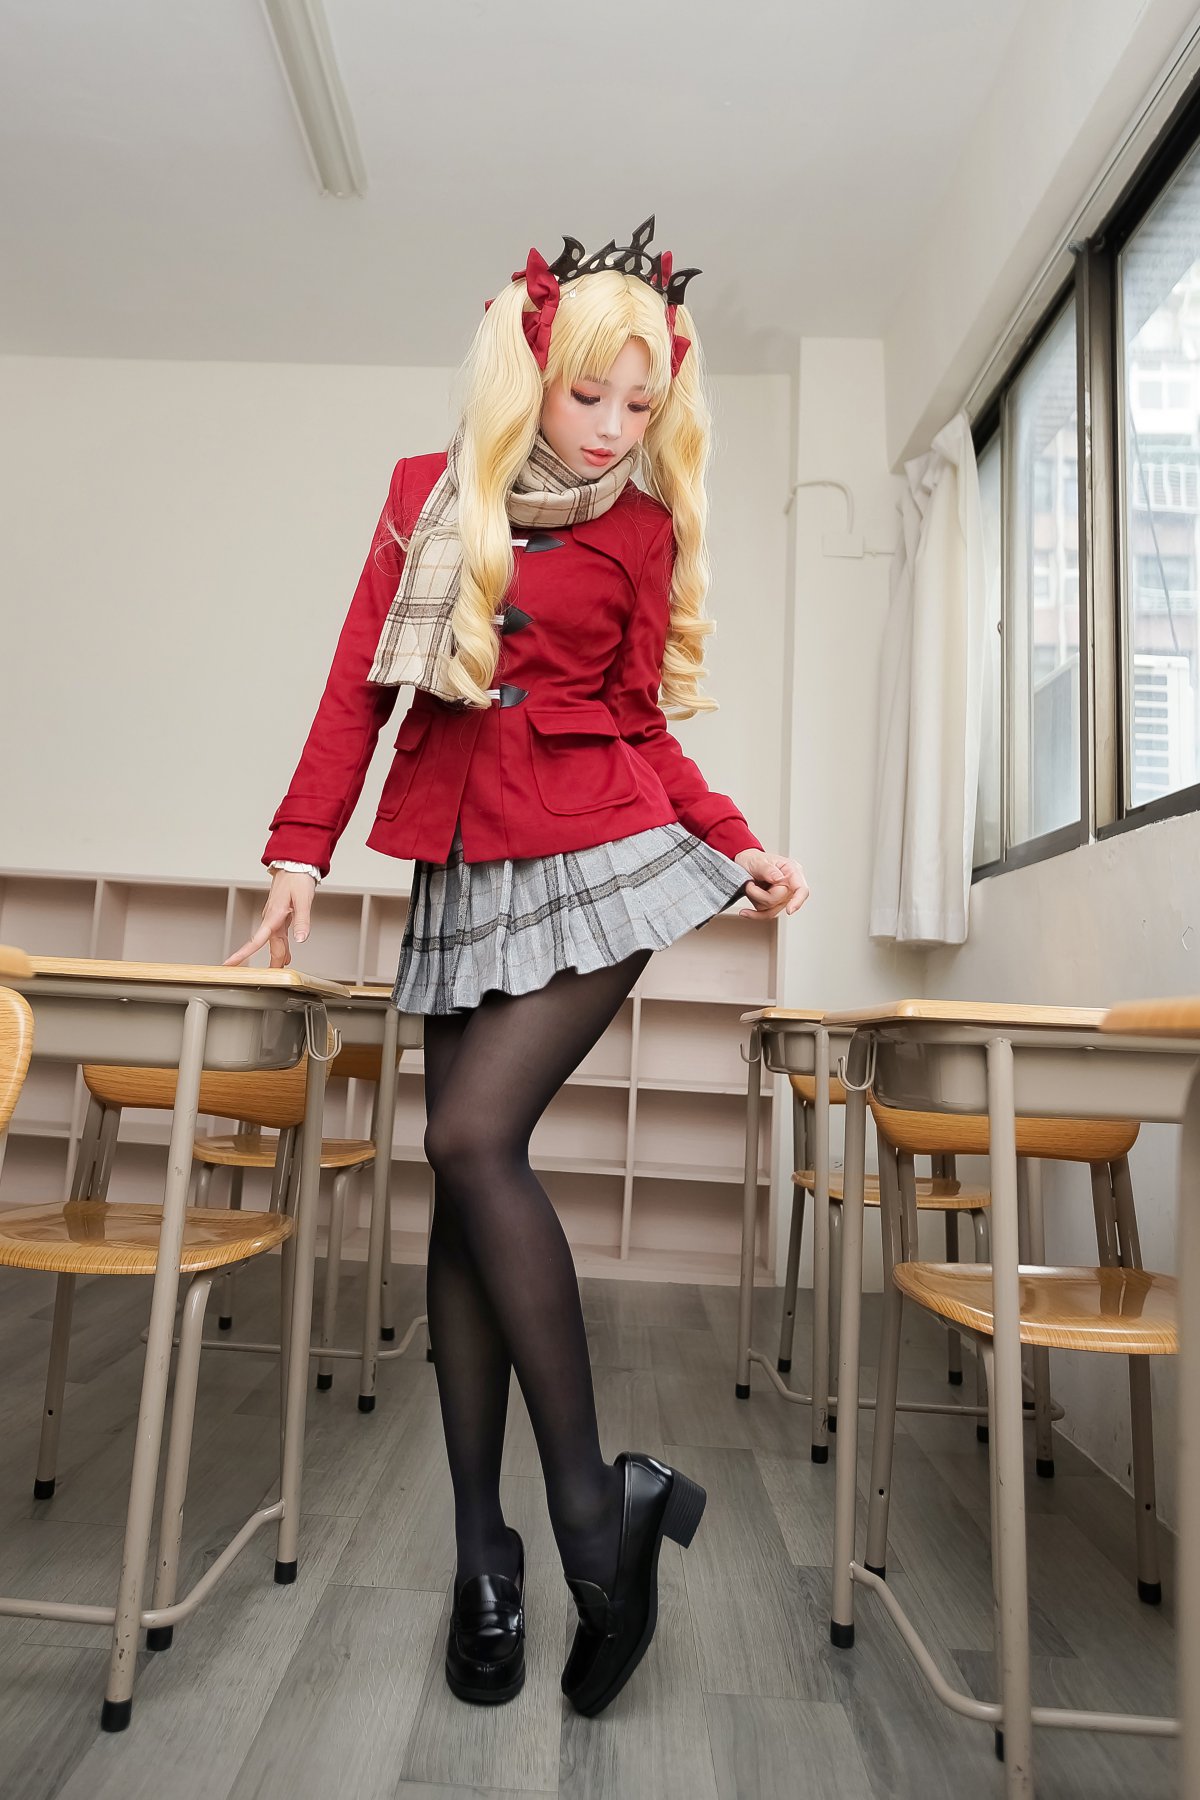 Coser@Ely Vol.022 ERE エレシュキガル 写真 A 0021